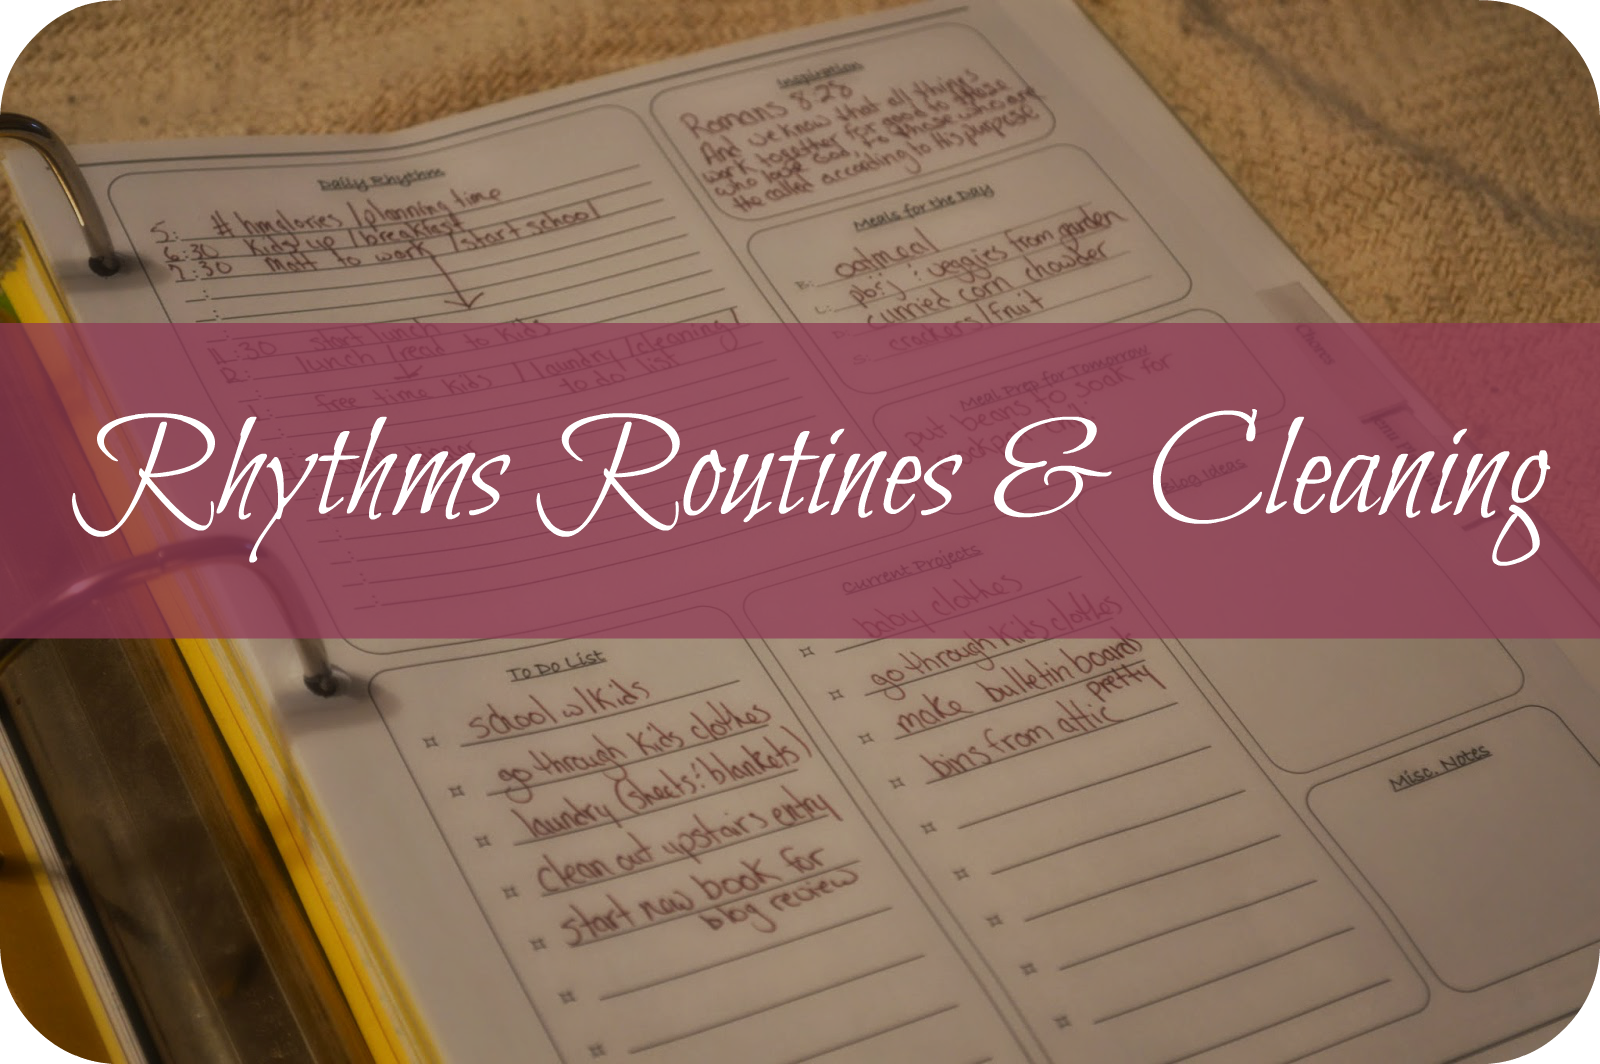 Rhythms Routines and Cleaning